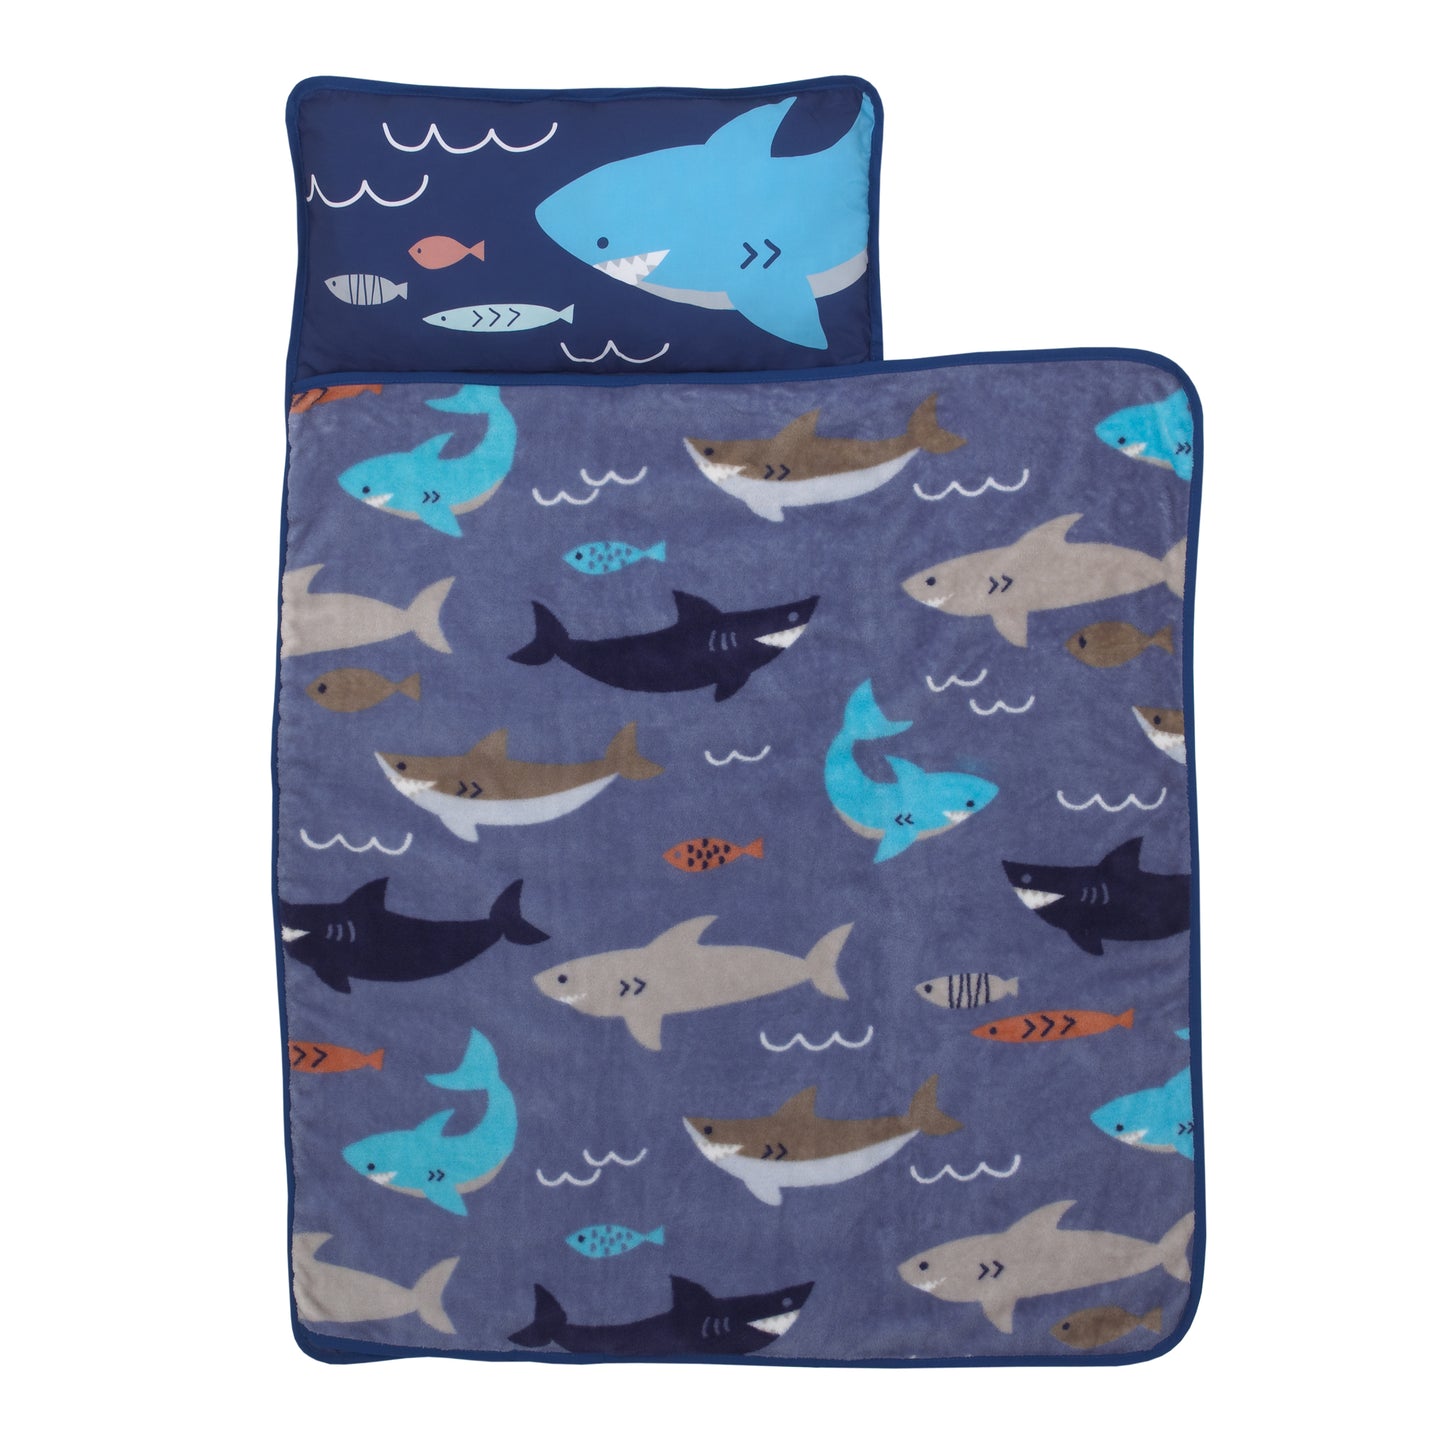 Everything Kids Blue and Grey Shark Toddler Nap Mat with Pillow and Blanket